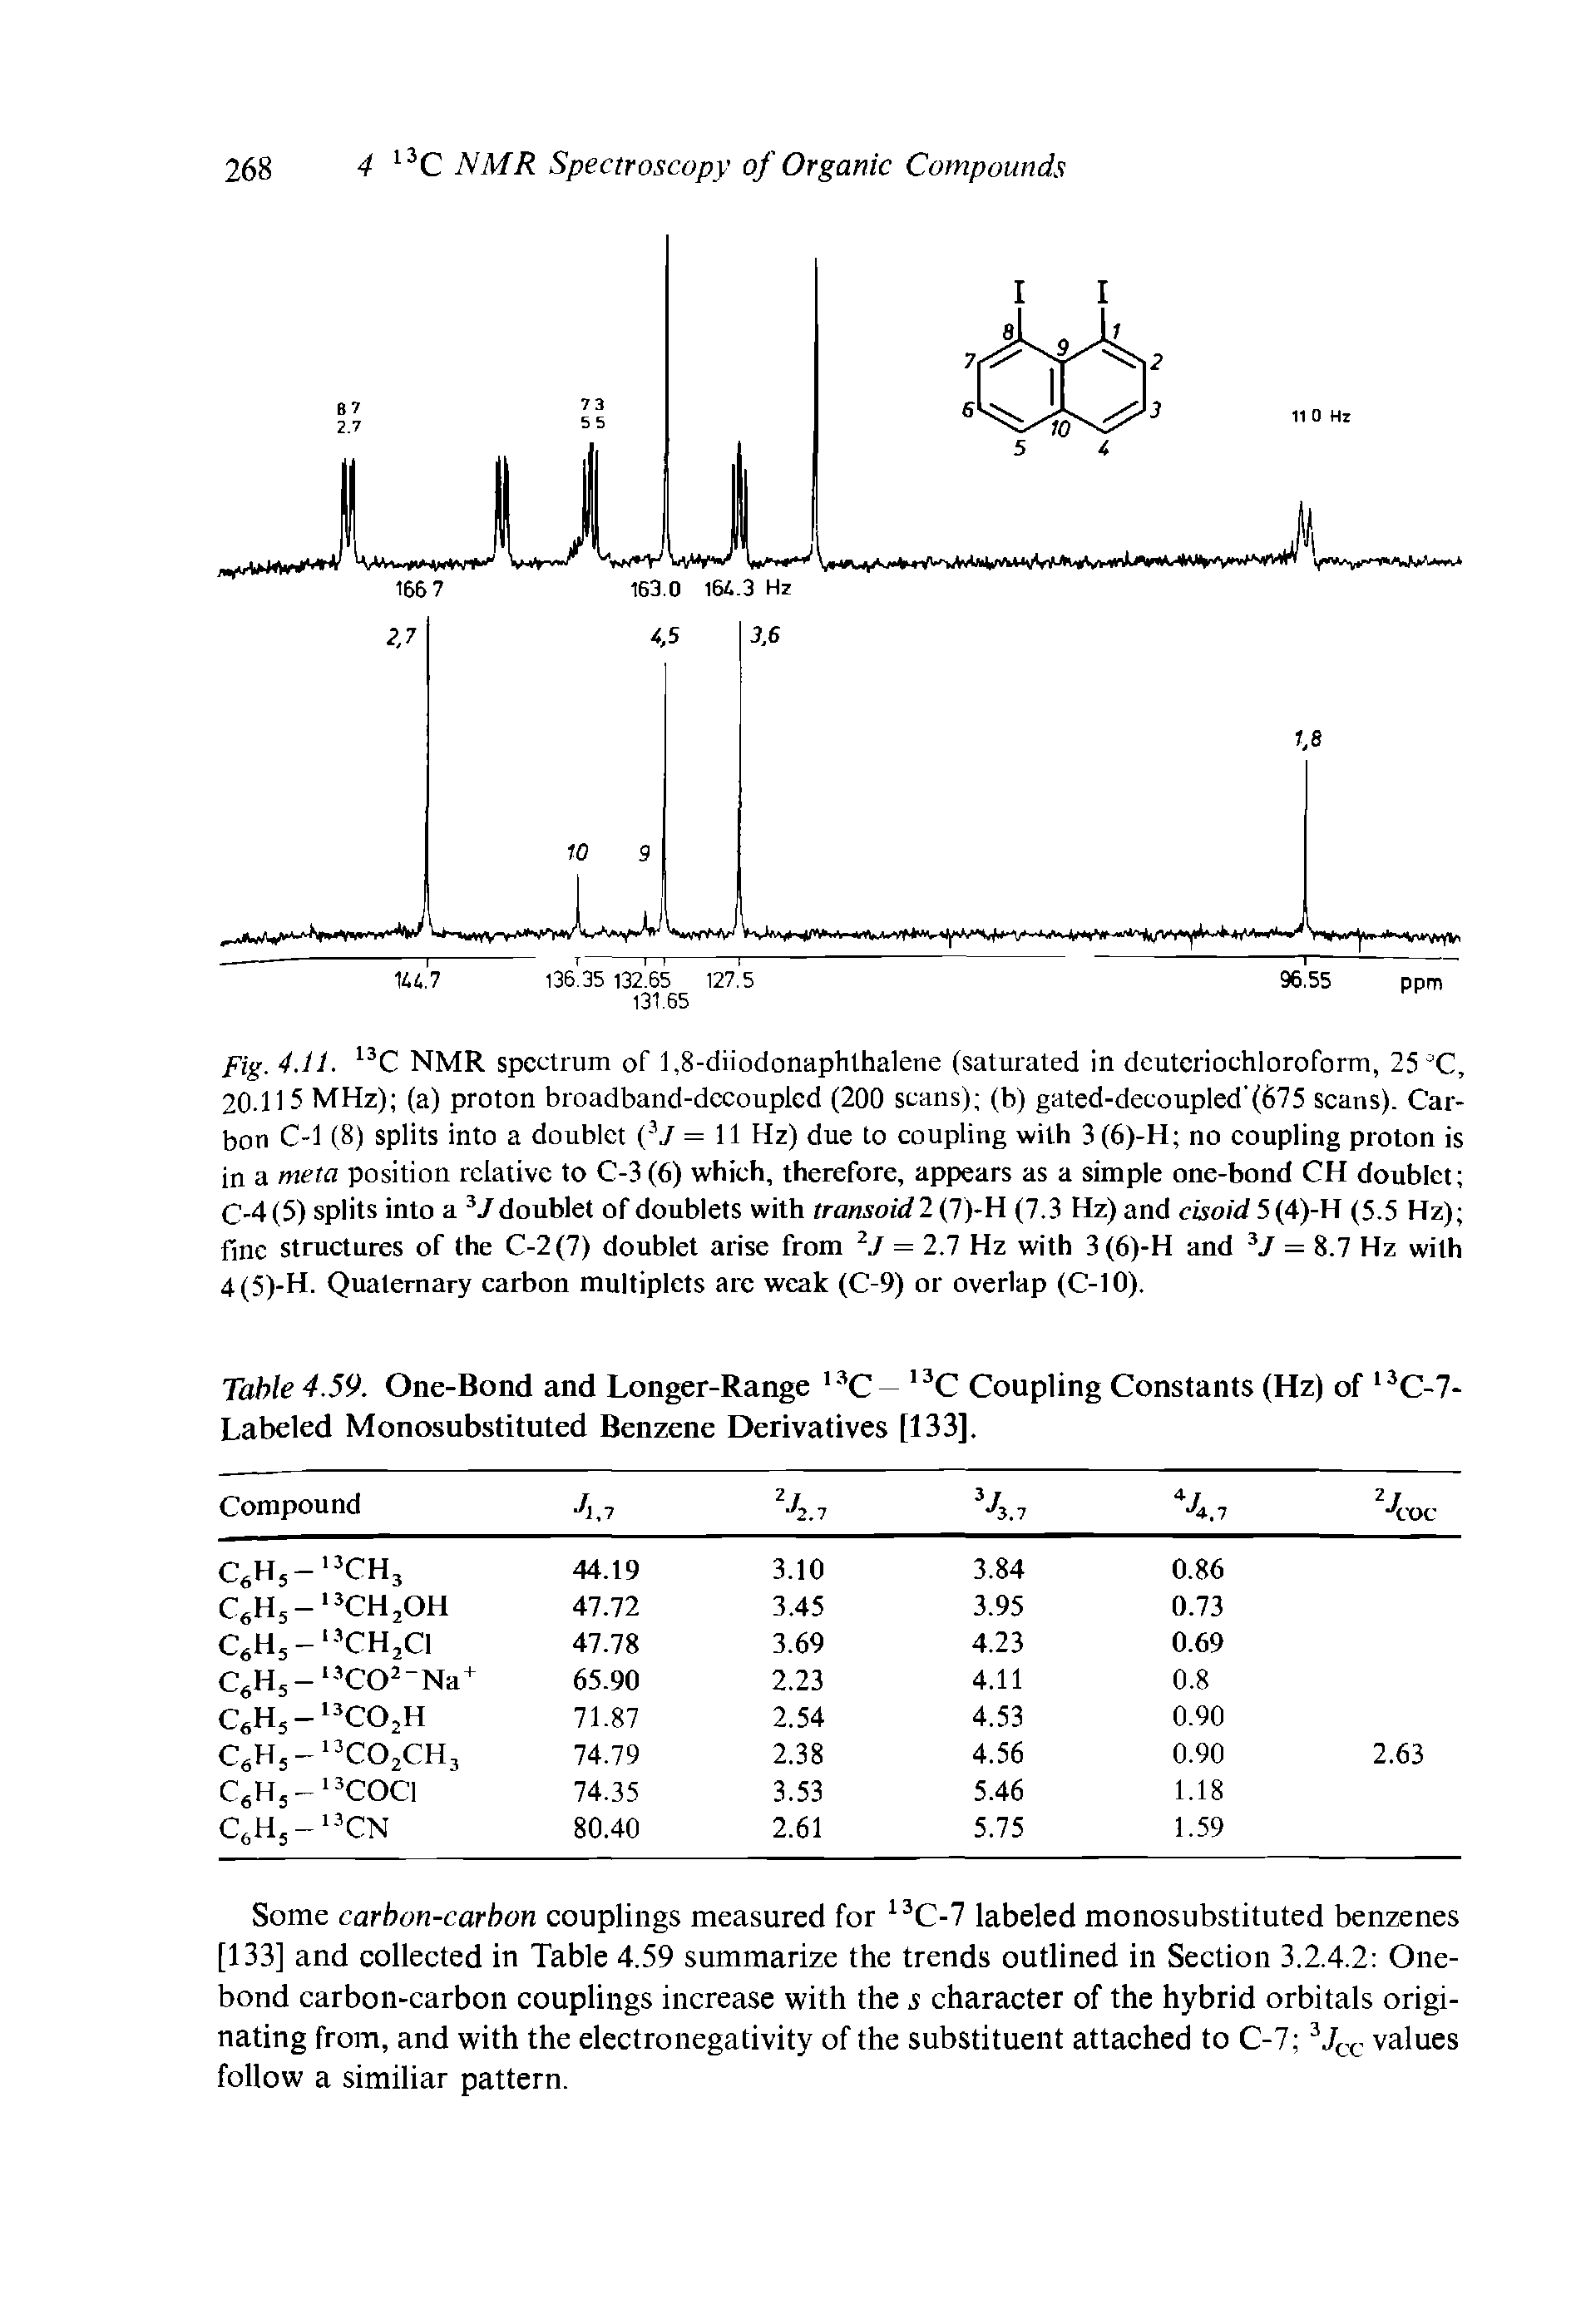 Table 4.59. One-Bond and Longer-Range 13C — 13C Coupling Constants (Hz) of 13C-7-Labeled Monosubstituted Benzene Derivatives [133],...